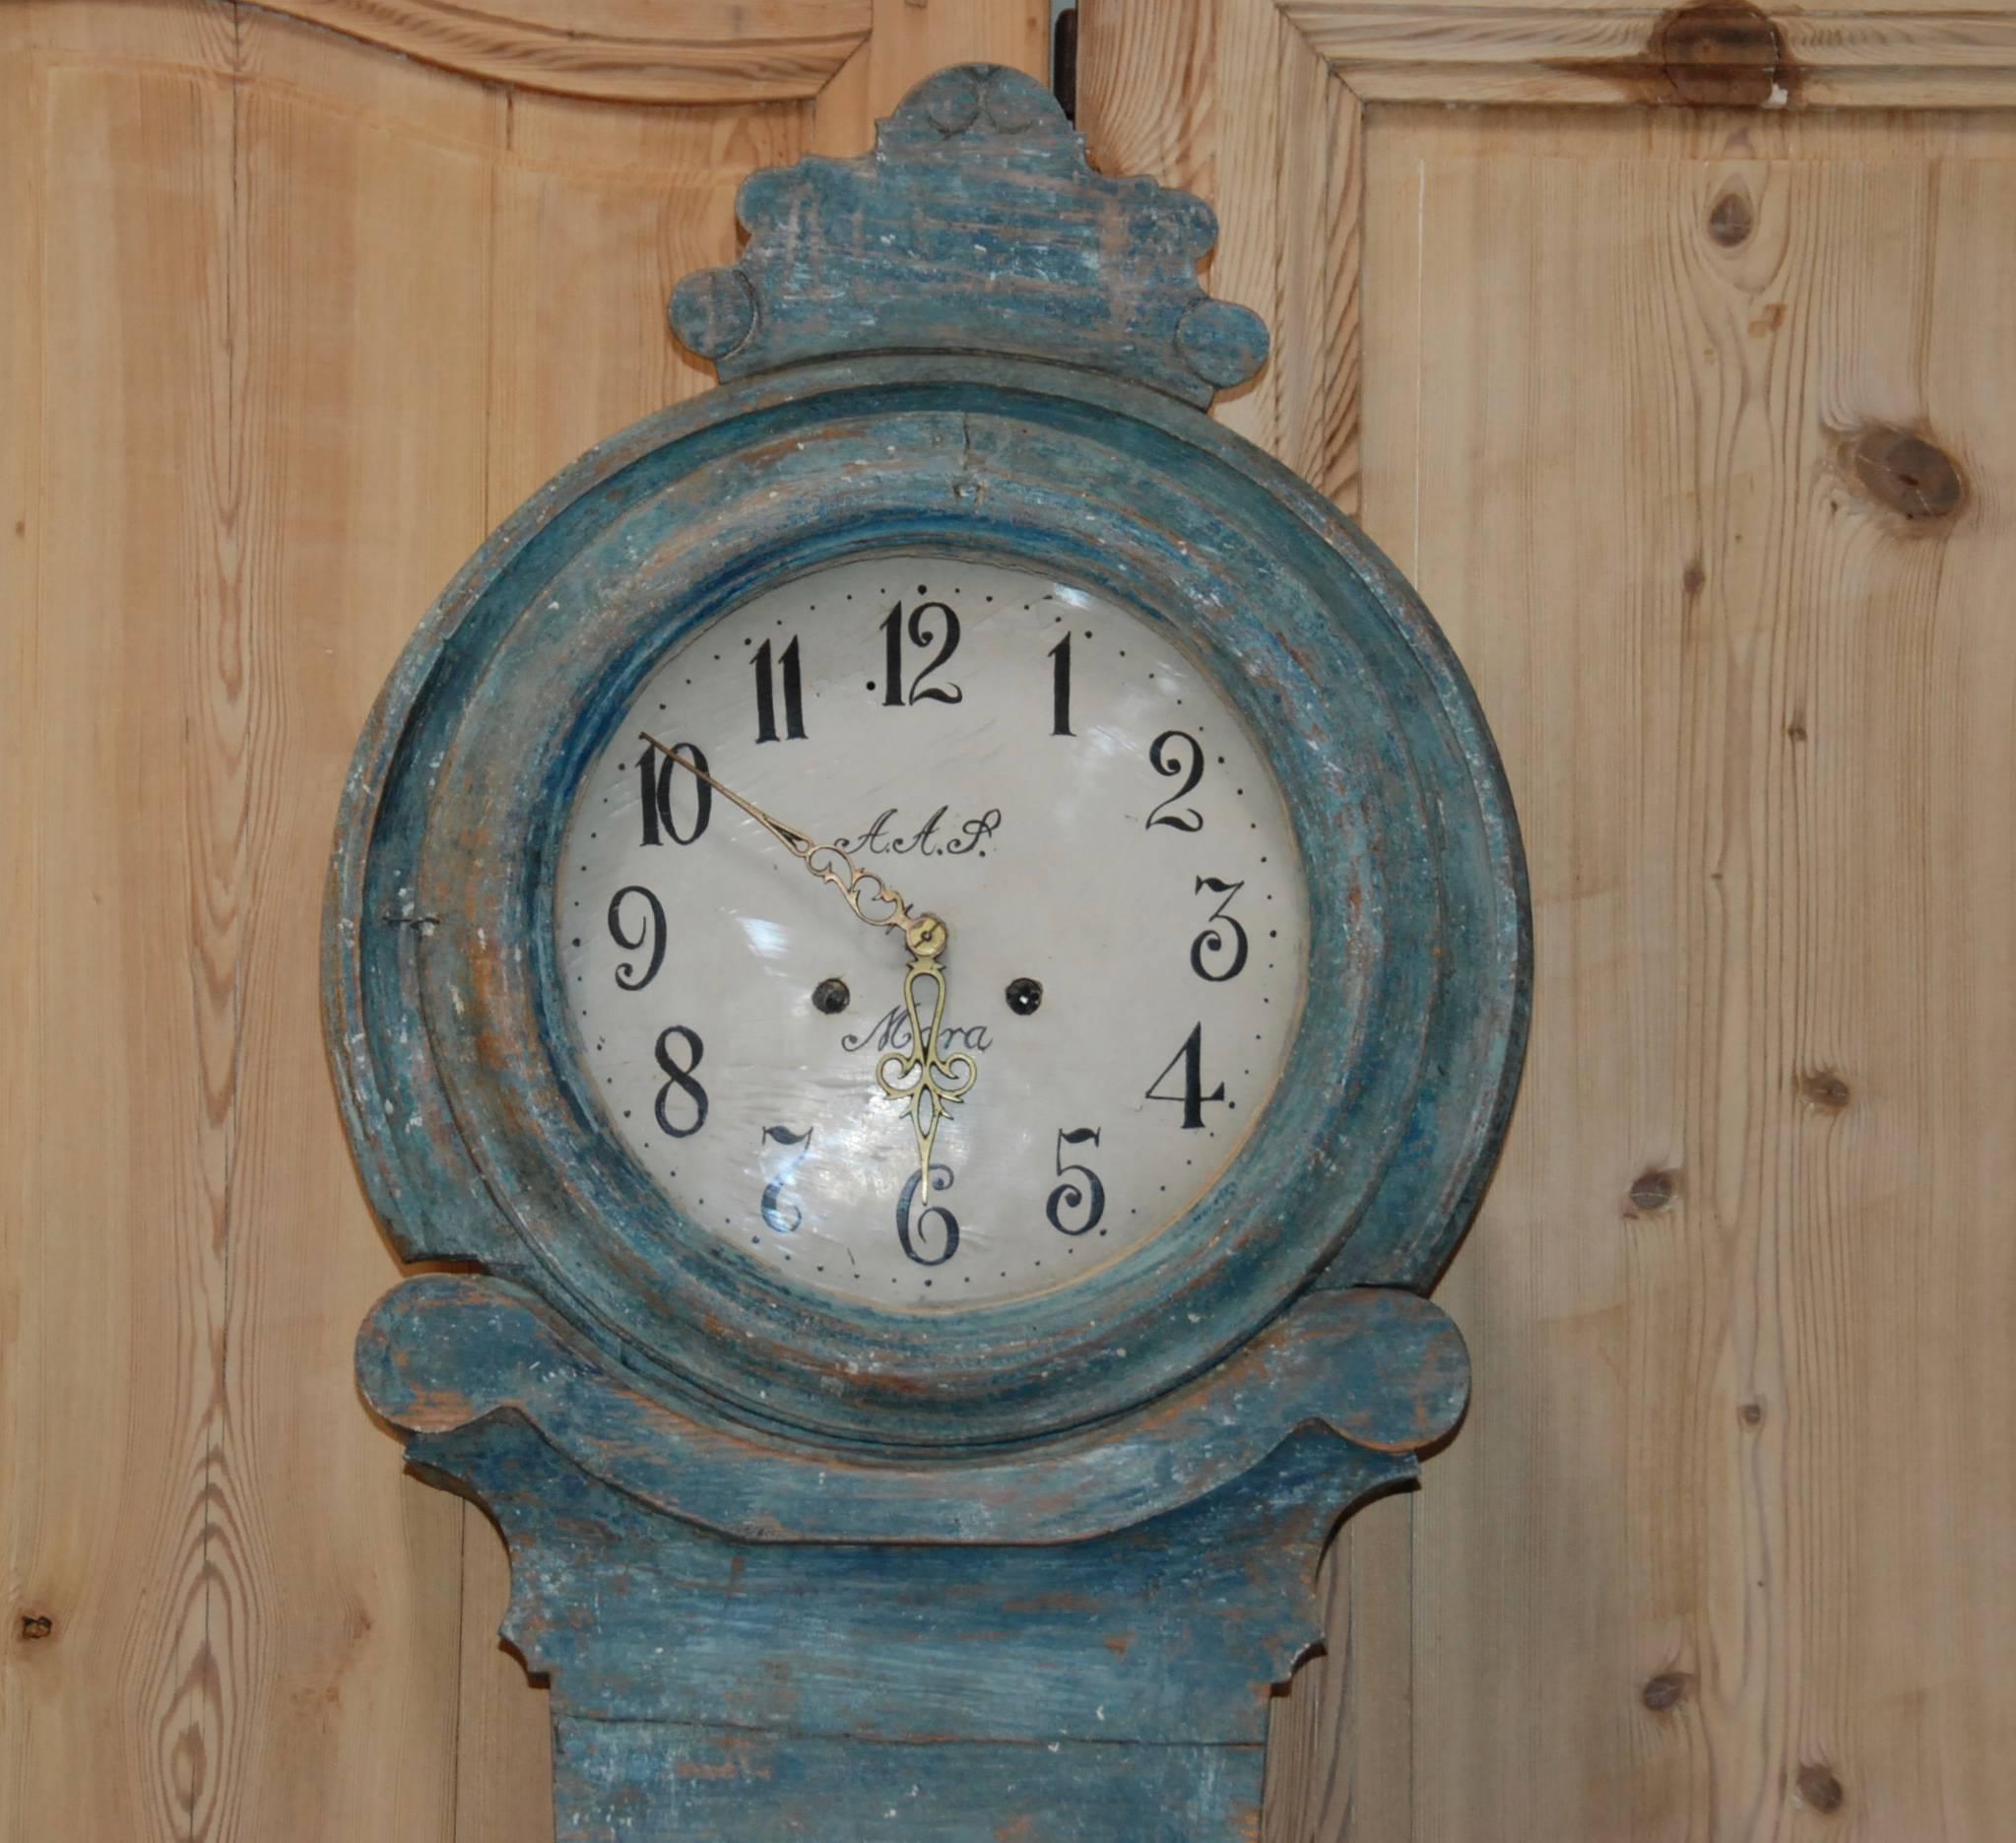 19th century Swedish Mora clock with lovely scalloped base and carved top. Beautiful Swedish blue color. Clock comes with original weights and pendulum. Very handsome piece!